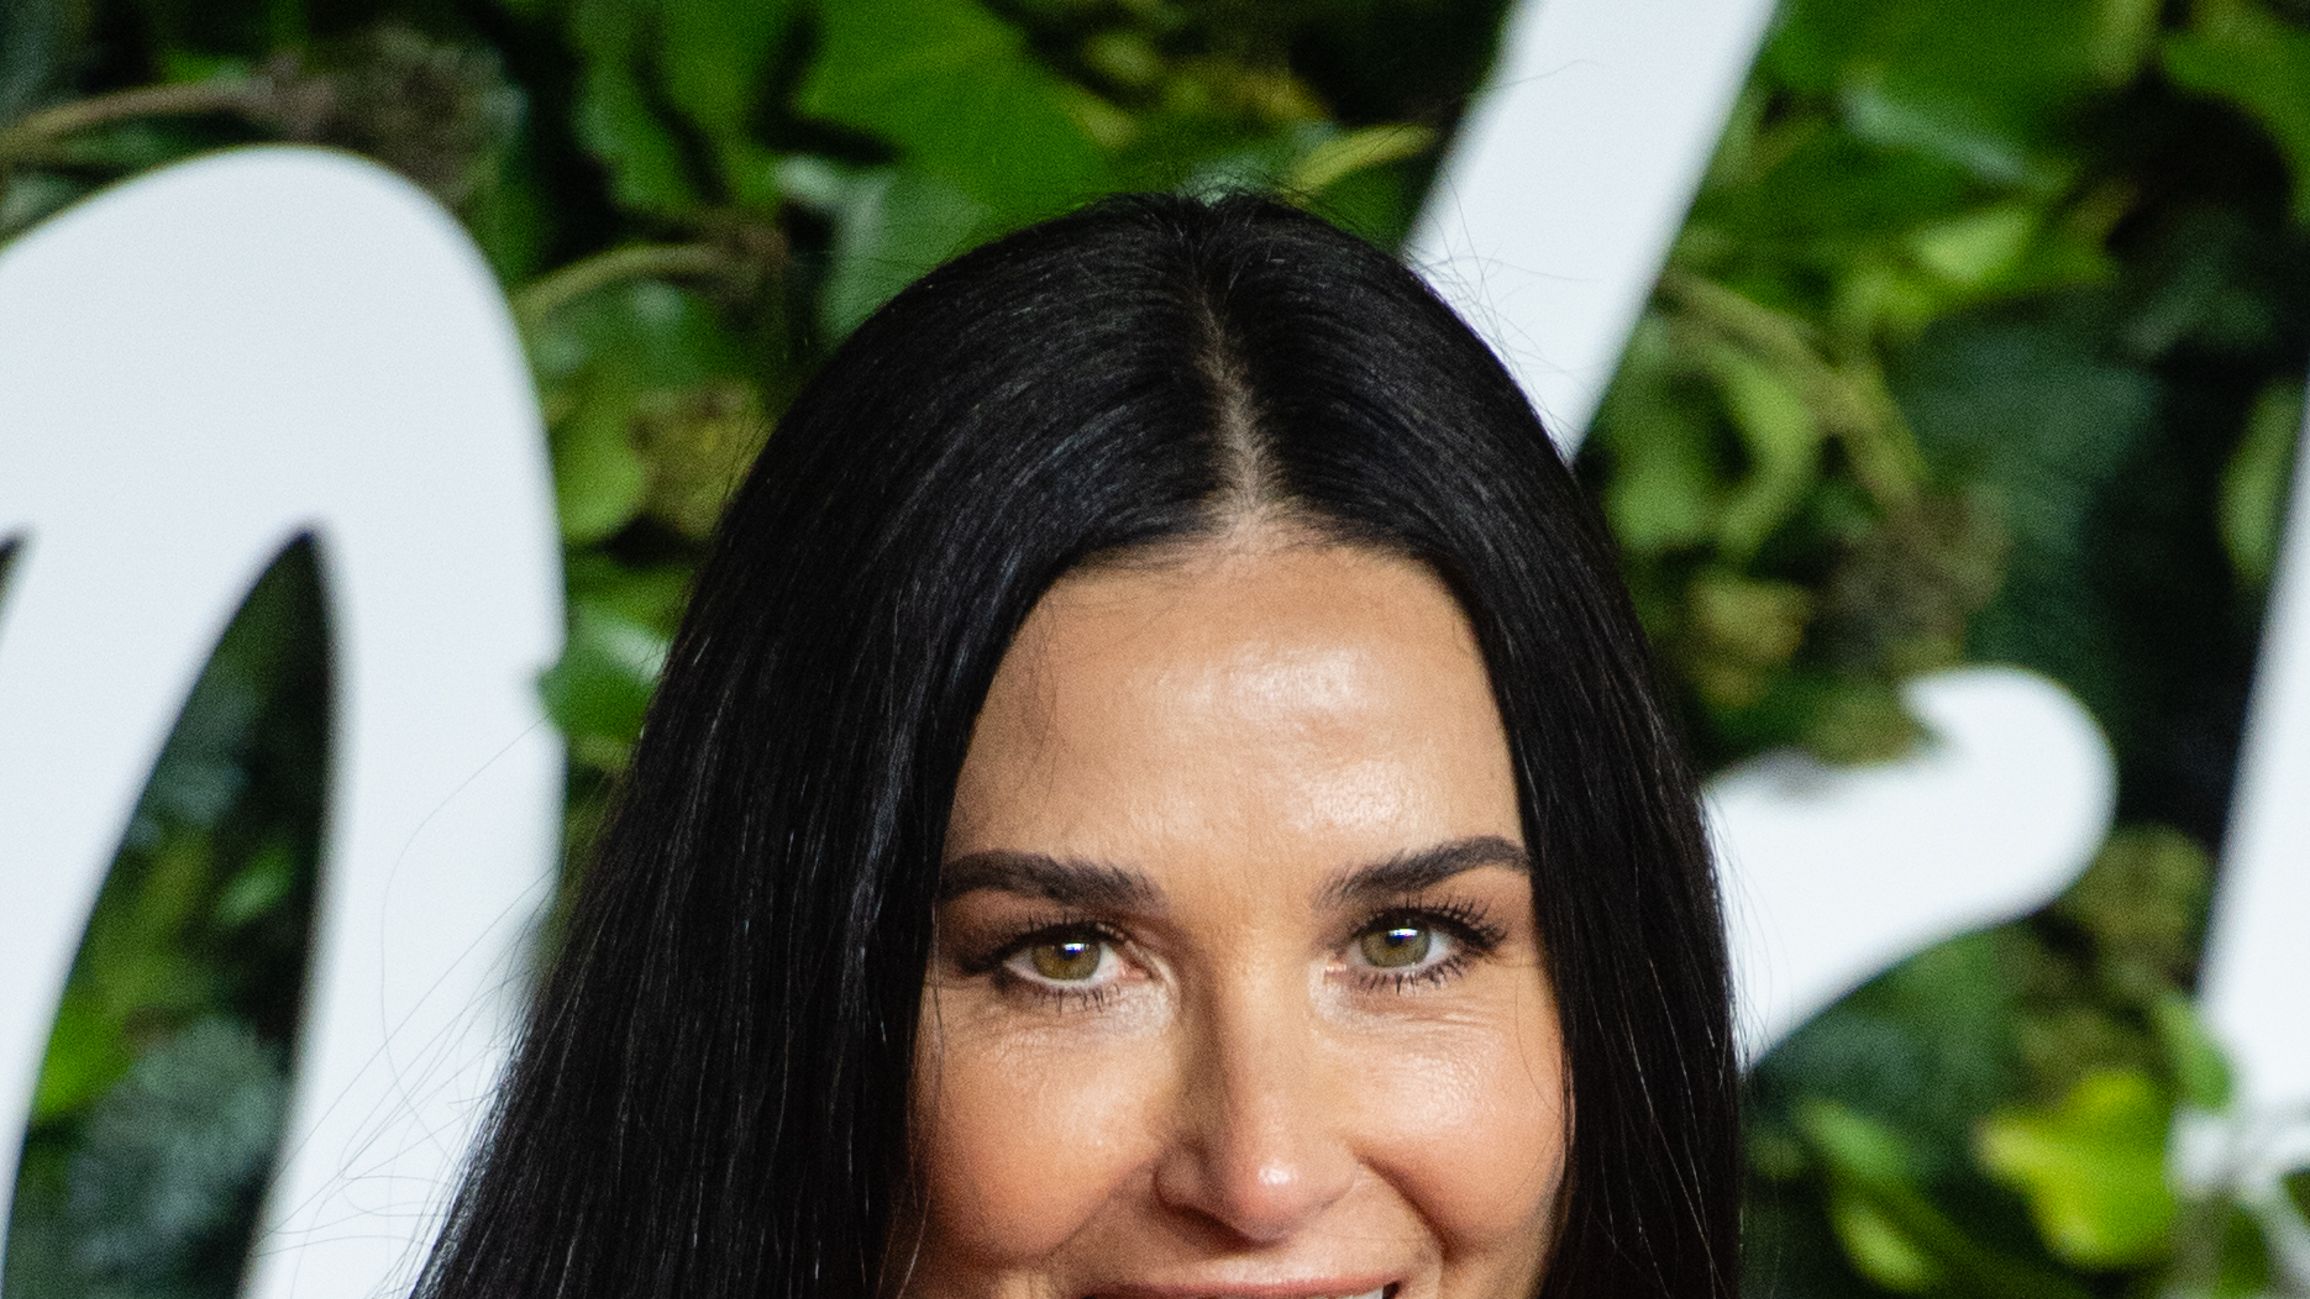 Demi Moore Is Excited to Turn 60: 'I Feel More Alive and Present